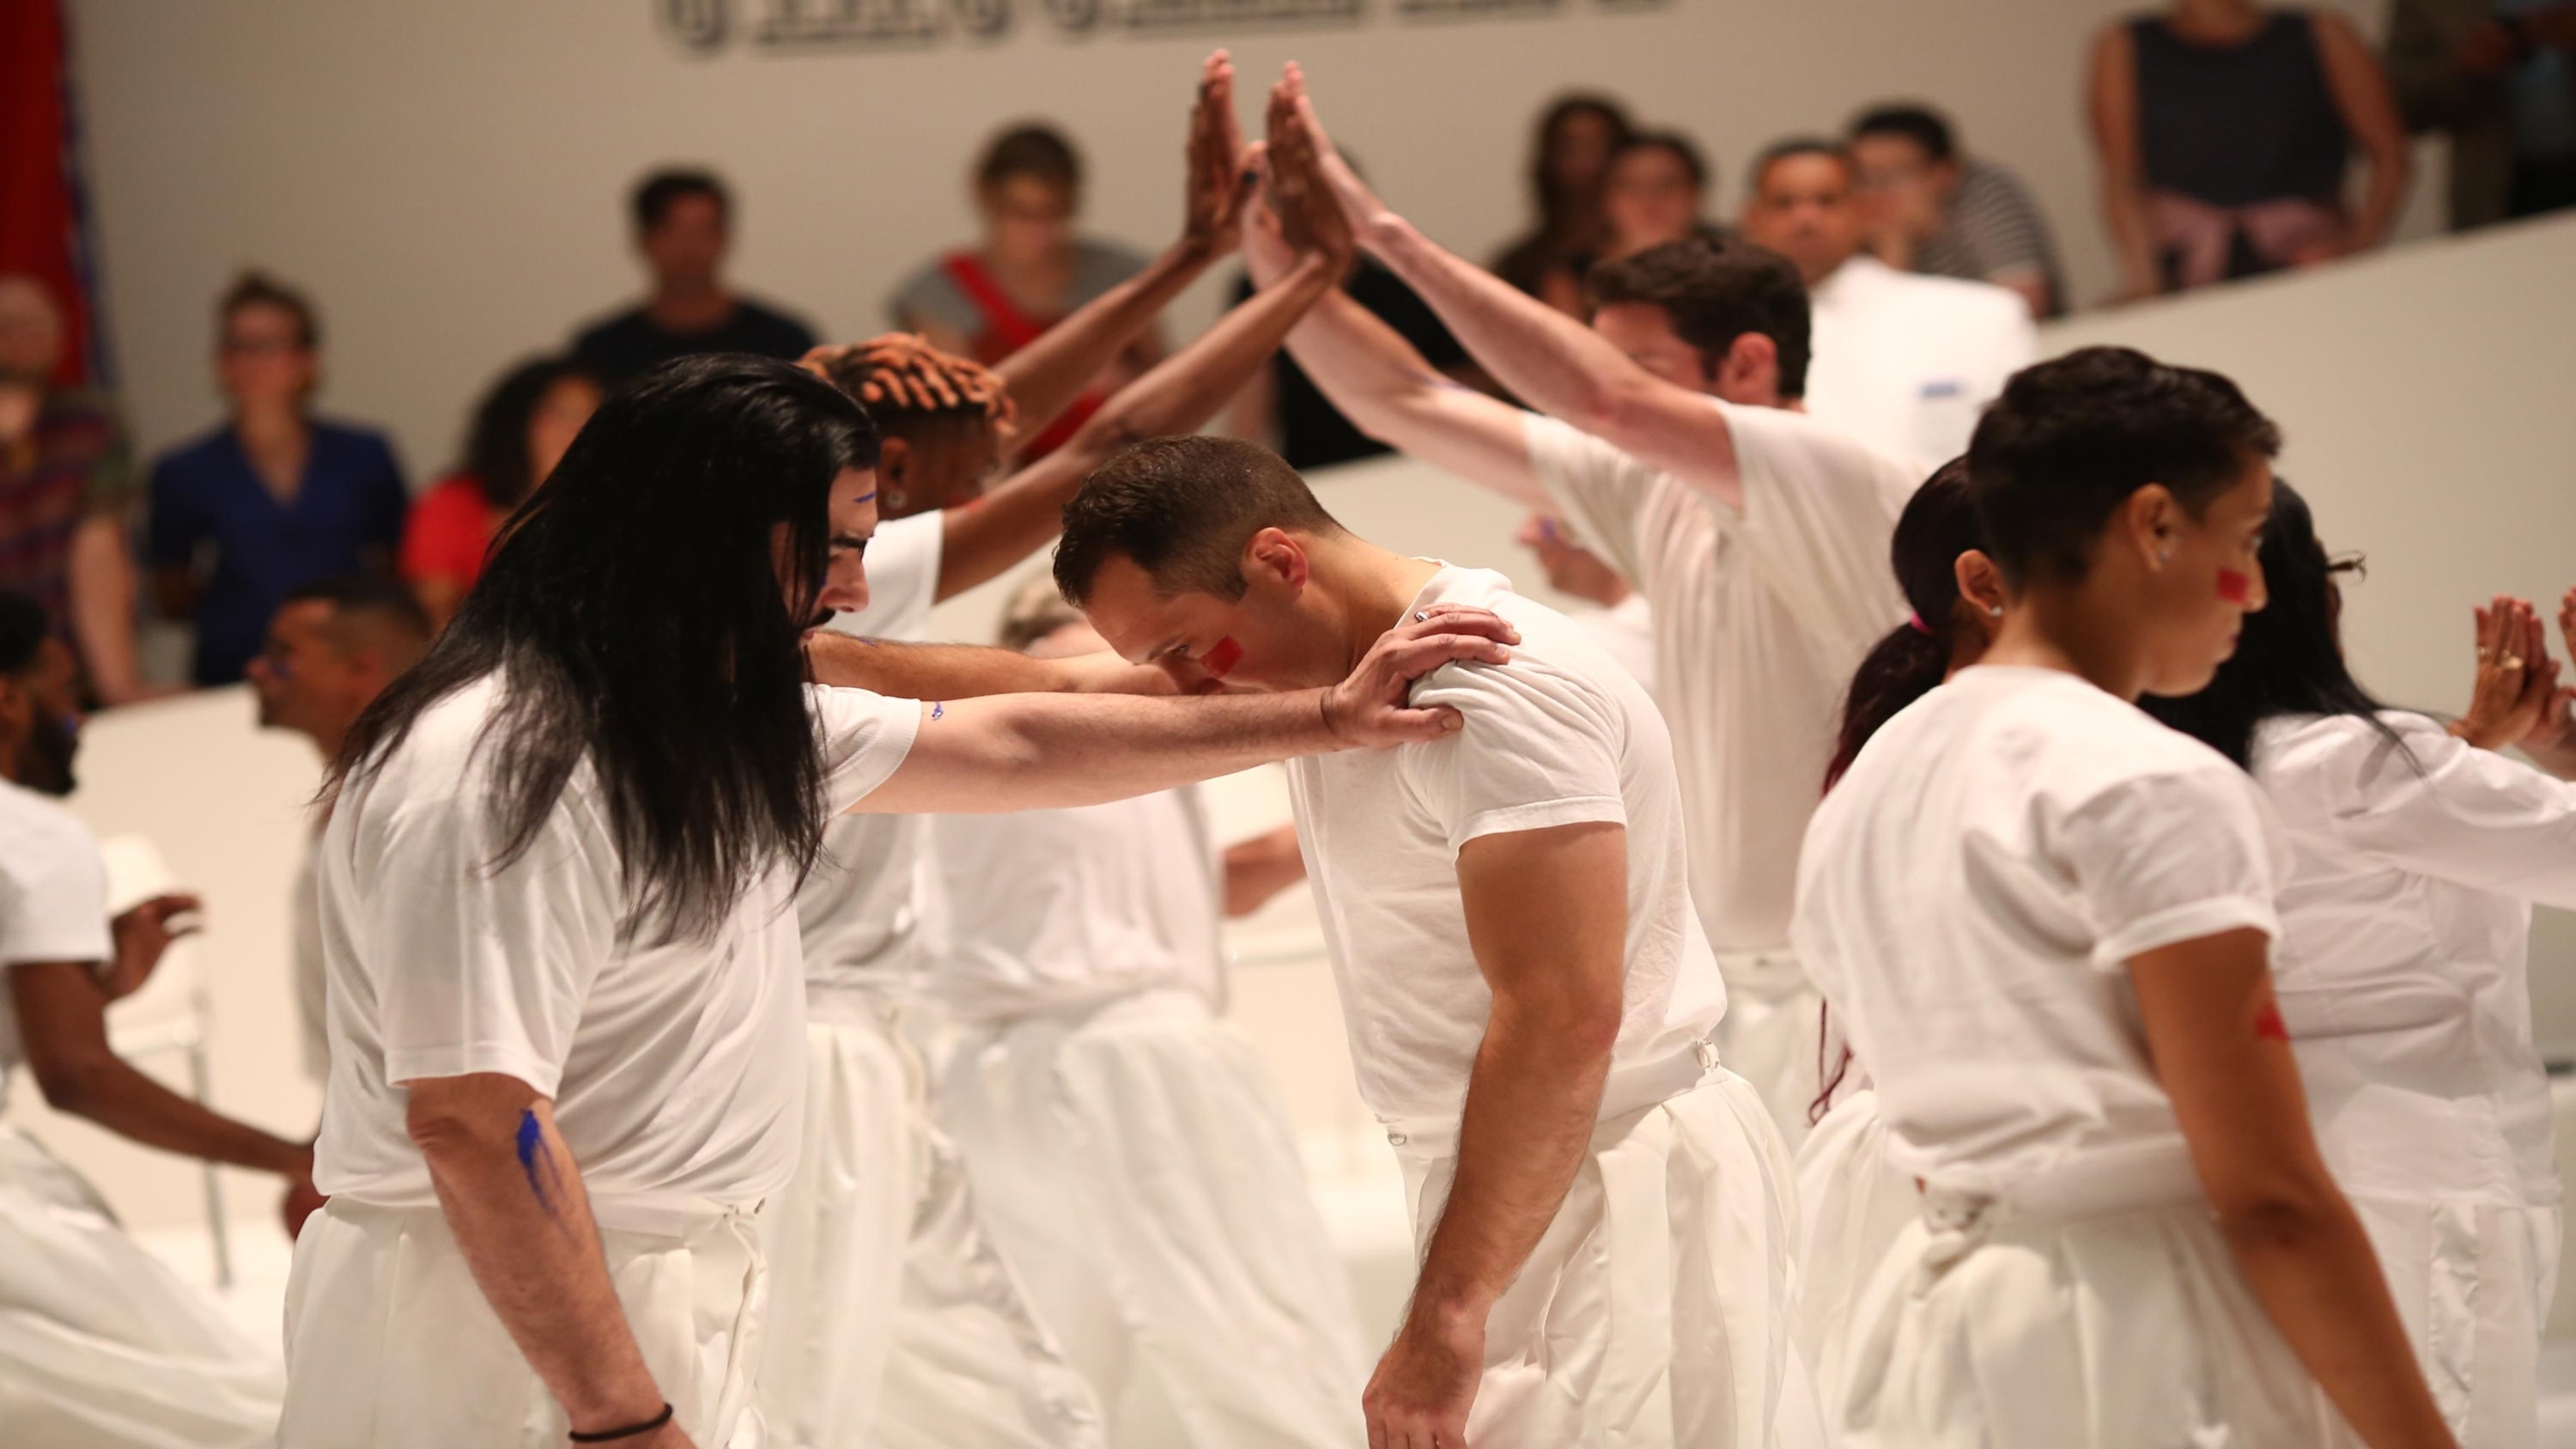 Performers dressed in white, engaging as pairs, in physical interactivity.